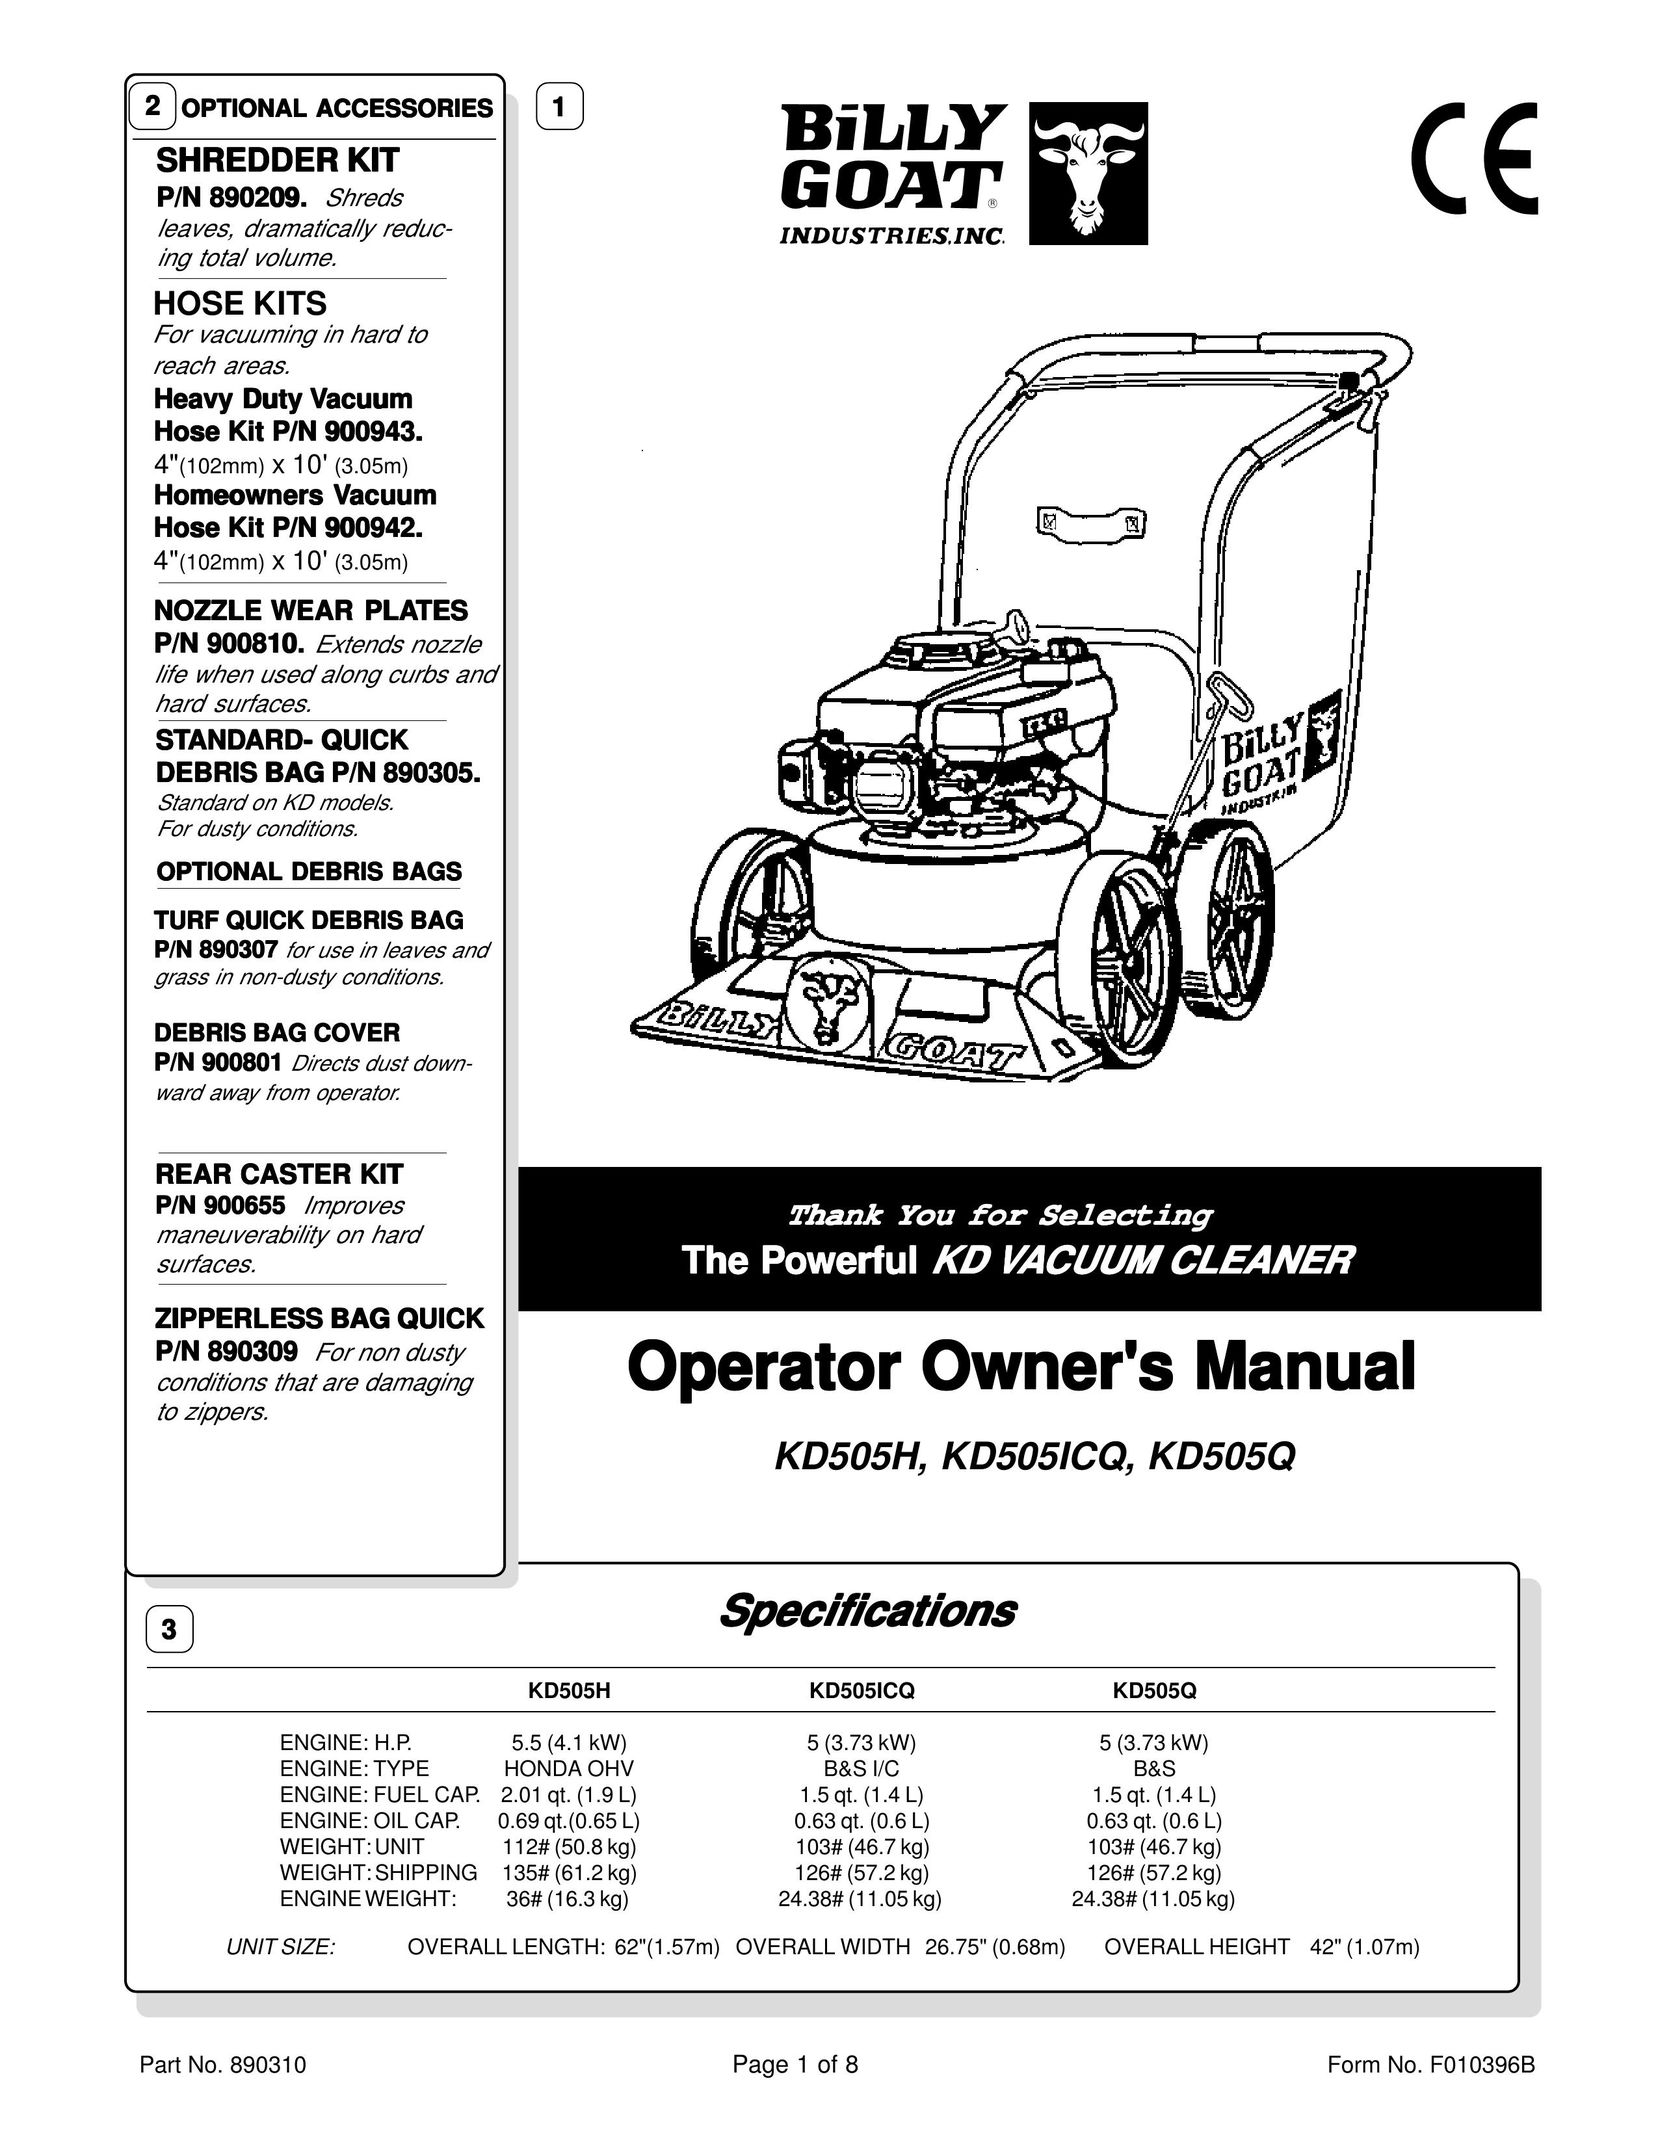 Billy Goat KD505Q Vacuum Cleaner User Manual (Page 1)